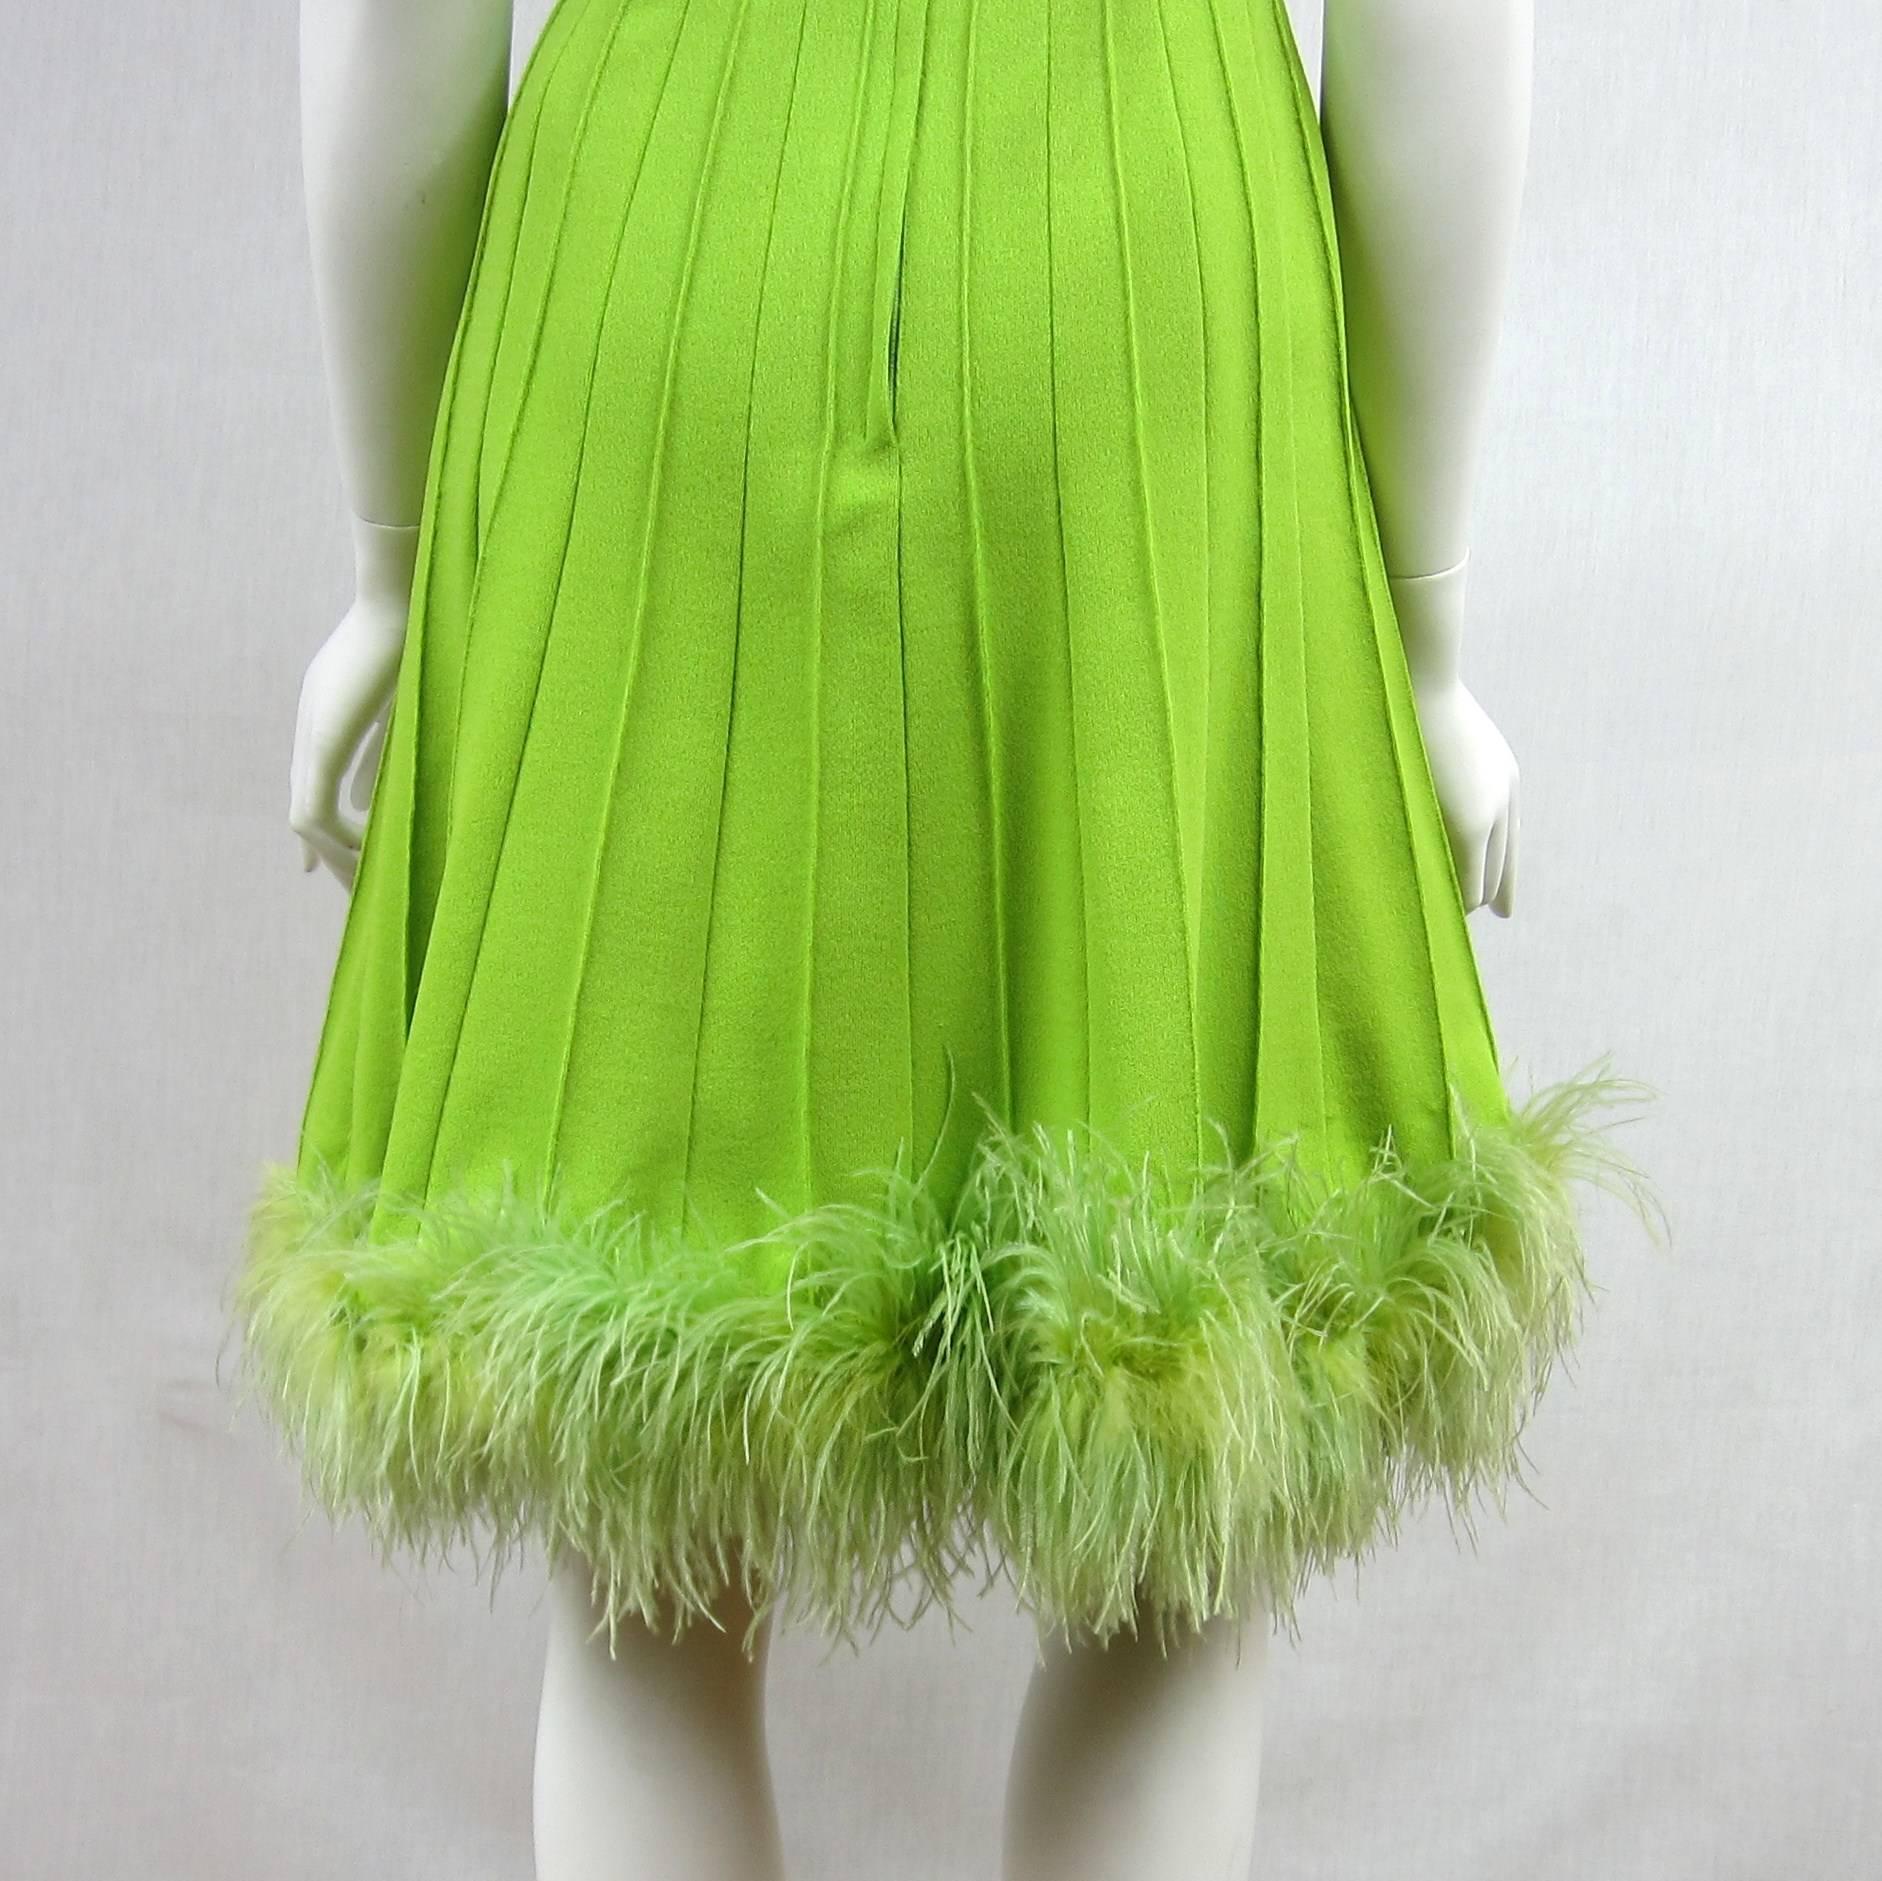  1960s Green Knit Ostrich Feather Dress Joseph Magnin In Good Condition For Sale In Wallkill, NY